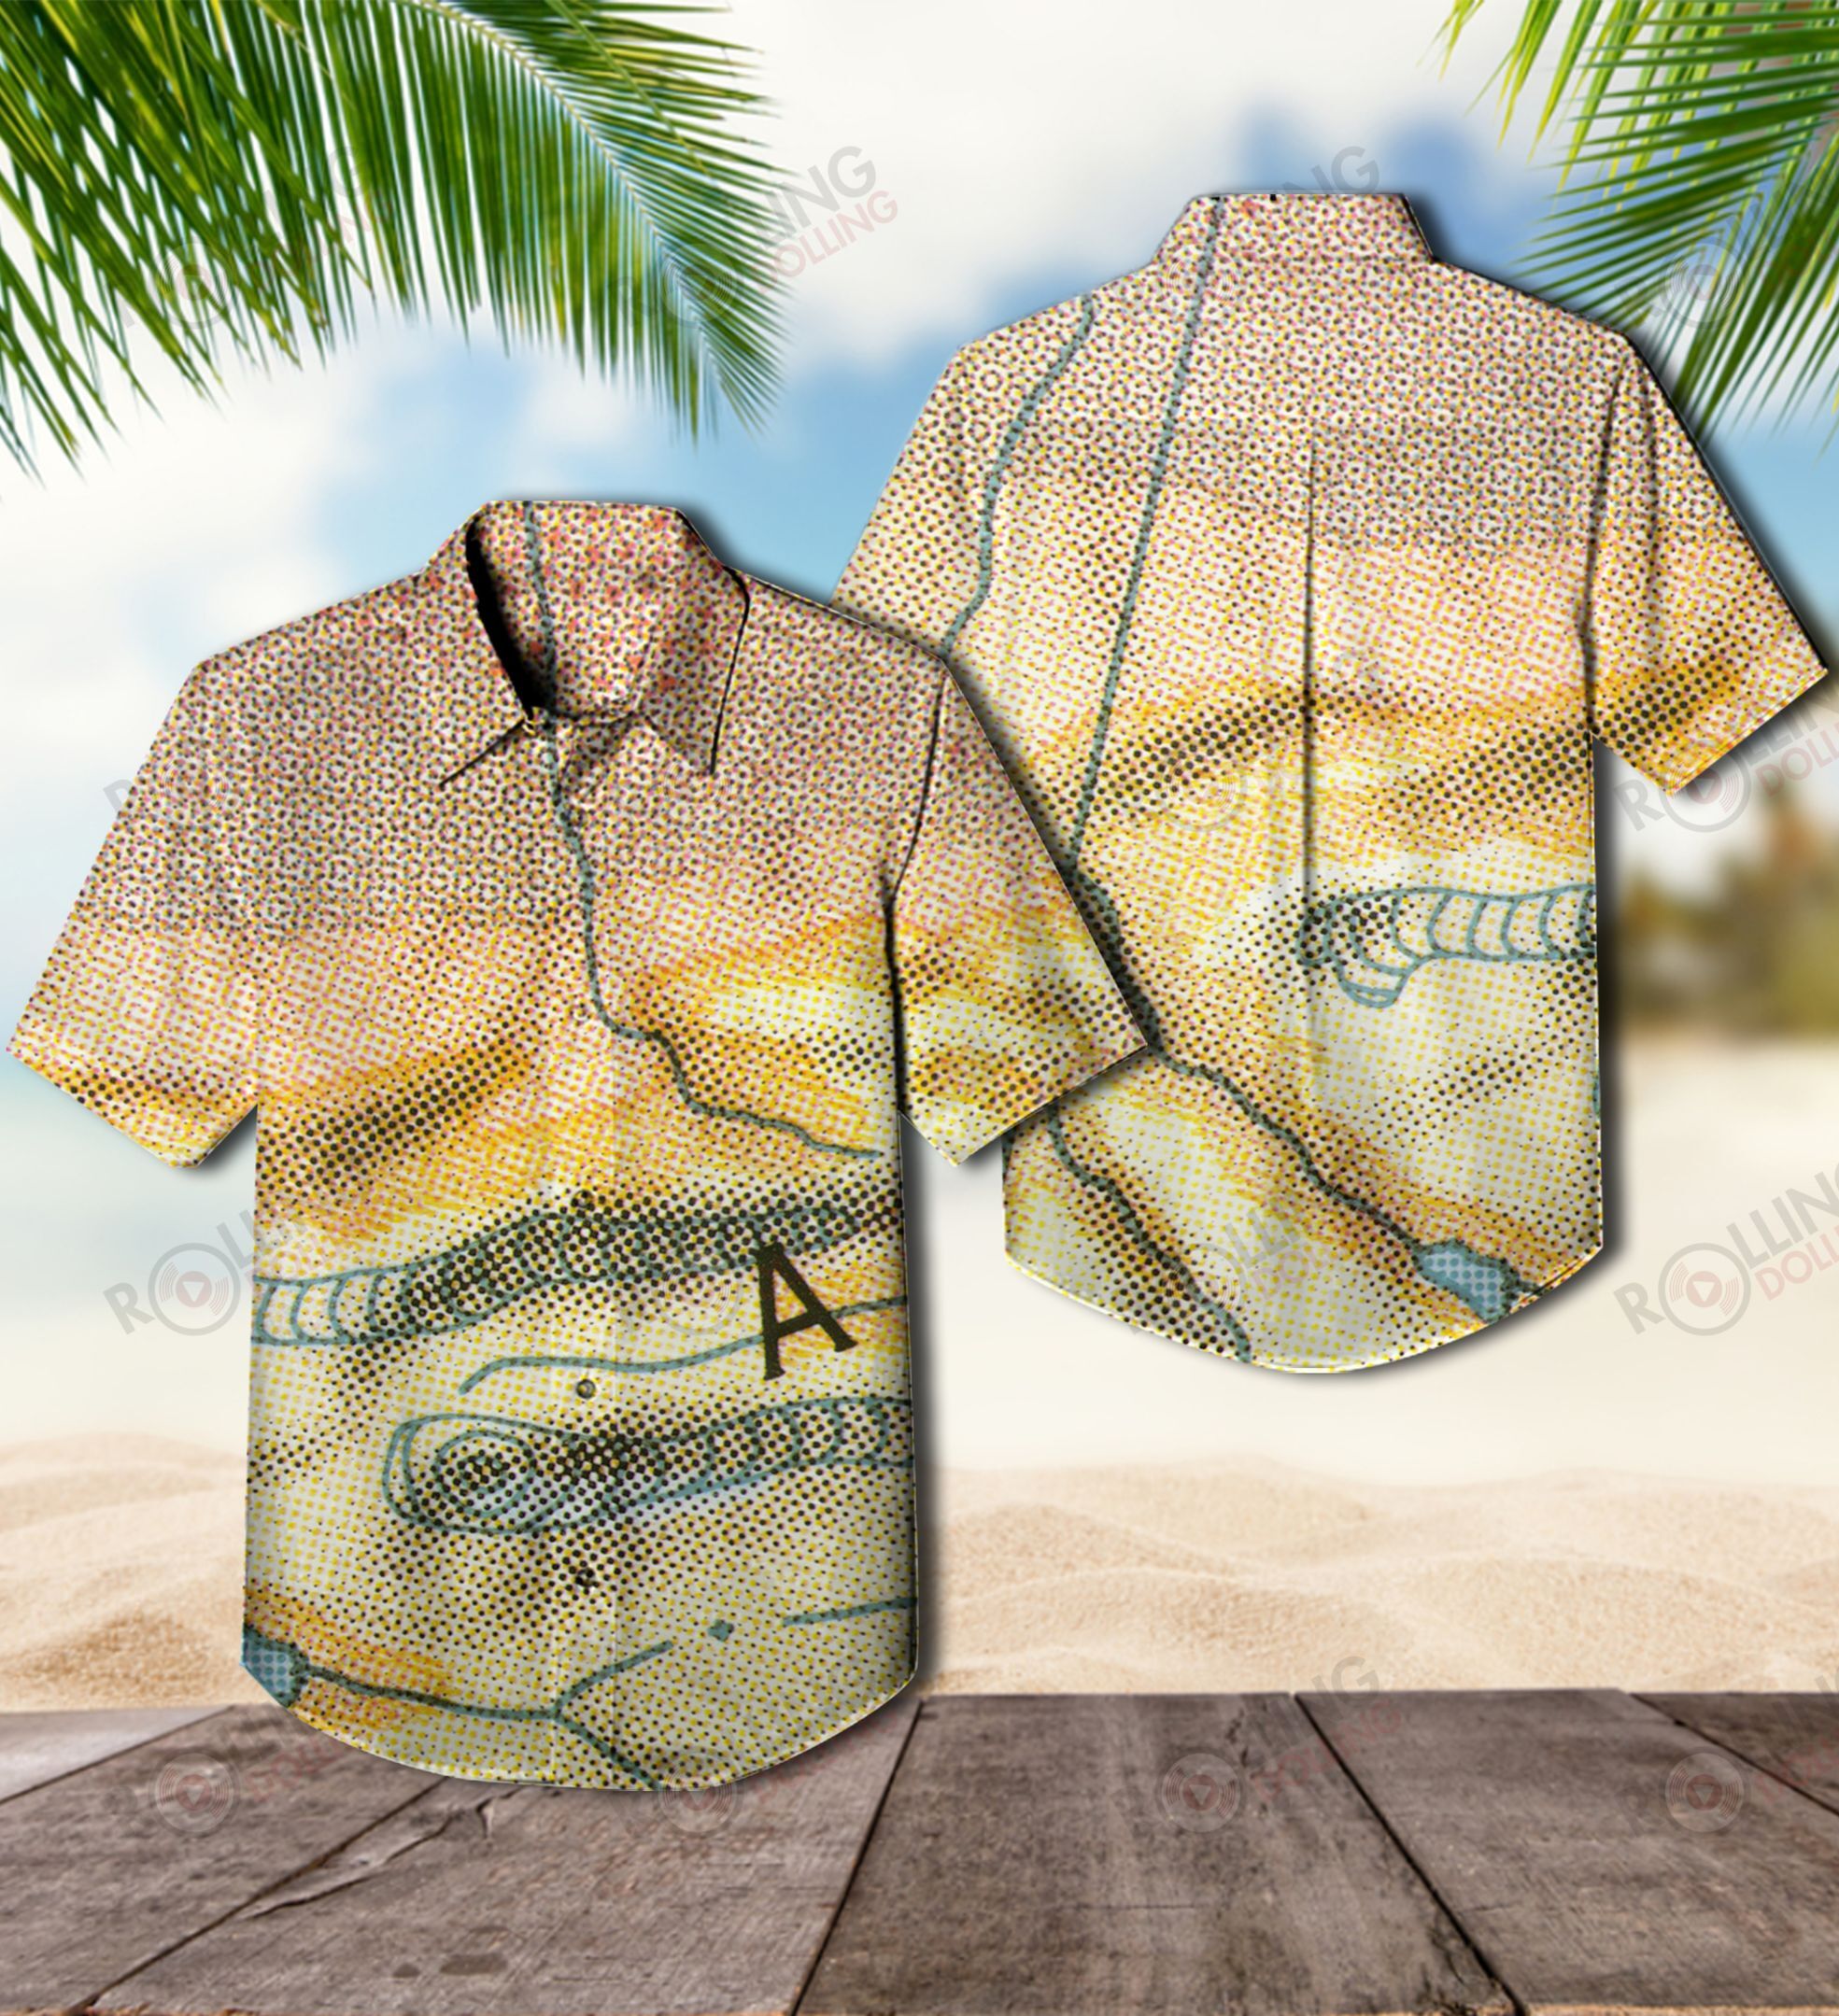 The Hawaiian Shirt is a popular shirt that is worn by Rock band fans 40